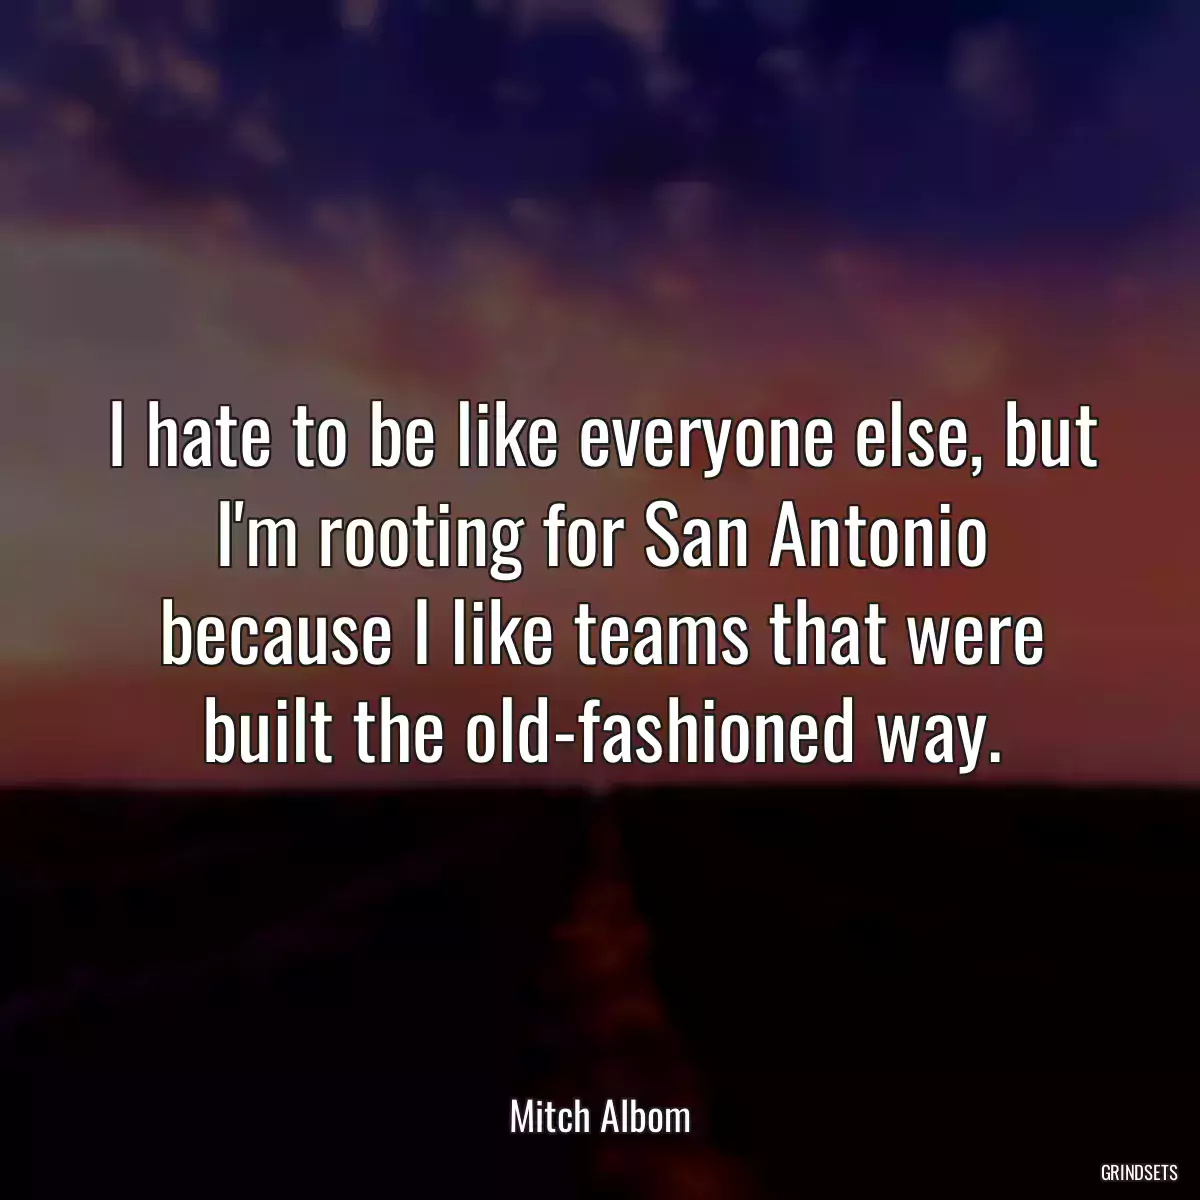 I hate to be like everyone else, but I\'m rooting for San Antonio because I like teams that were built the old-fashioned way.